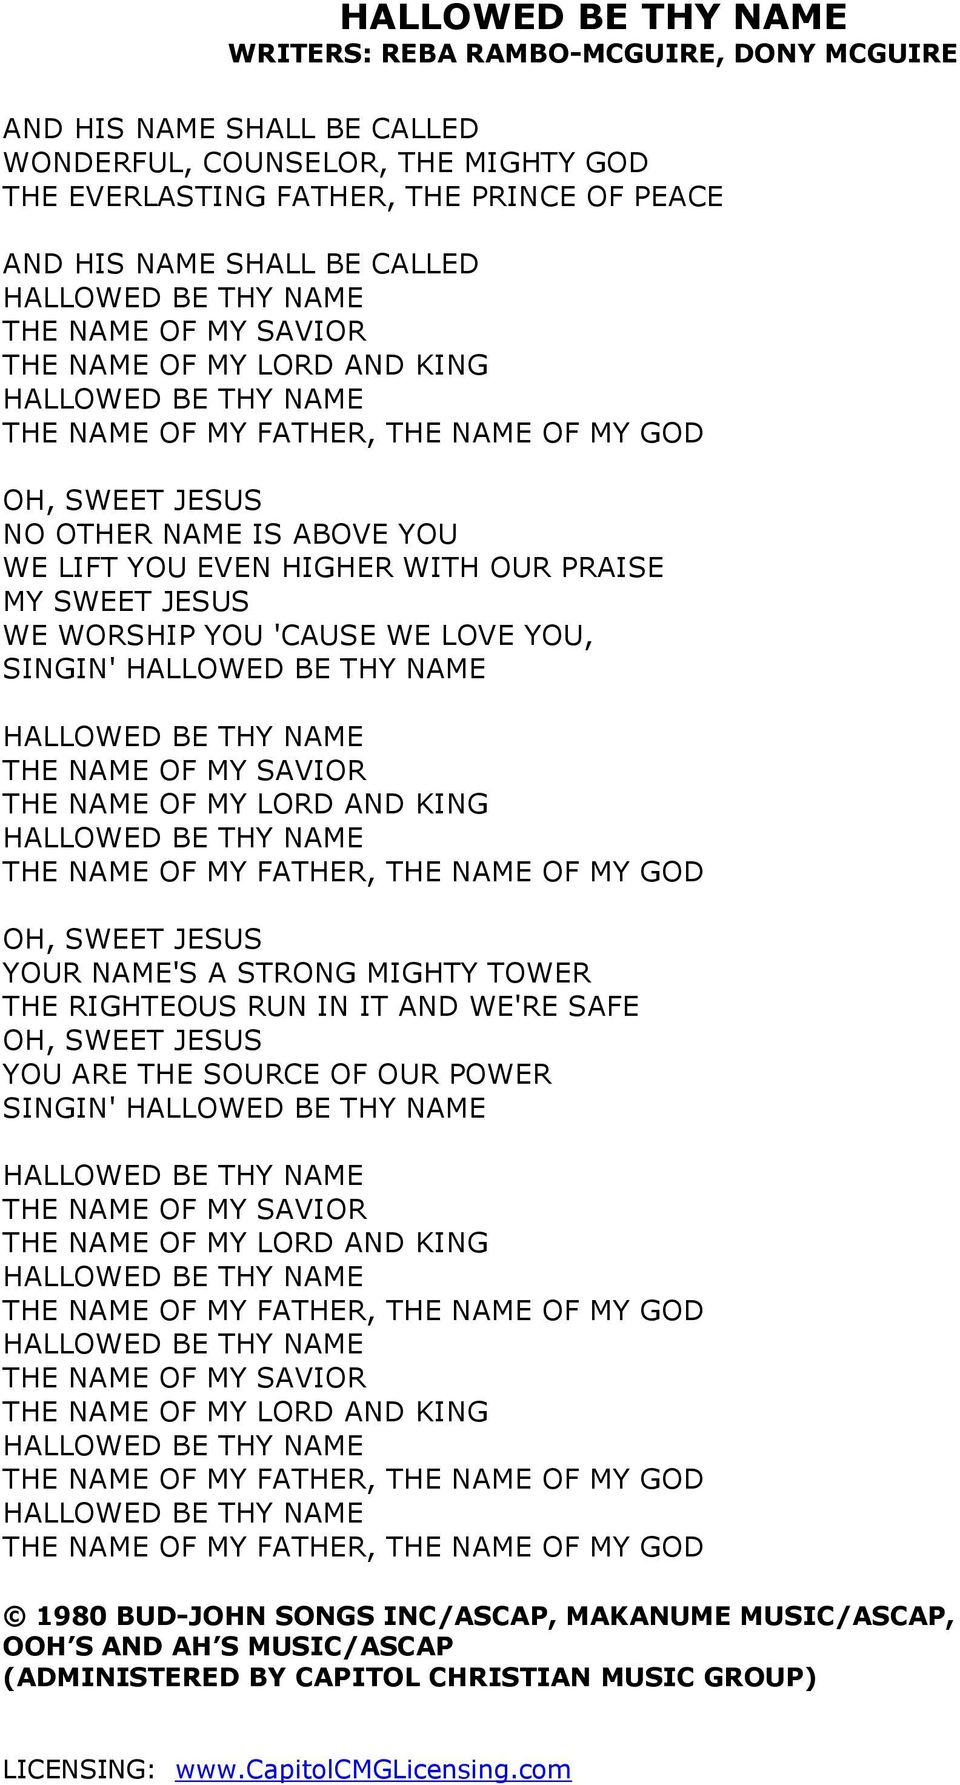 NAME OF MY LORD AND KING THE NAME OF MY FATHER, THE NAME OF MY GOD OH, SWEET JESUS YOUR NAME'S A STRONG MIGHTY TOWER THE RIGHTEOUS RUN IN IT AND WE'RE SAFE OH, SWEET JESUS YOU ARE THE SOURCE OF OUR